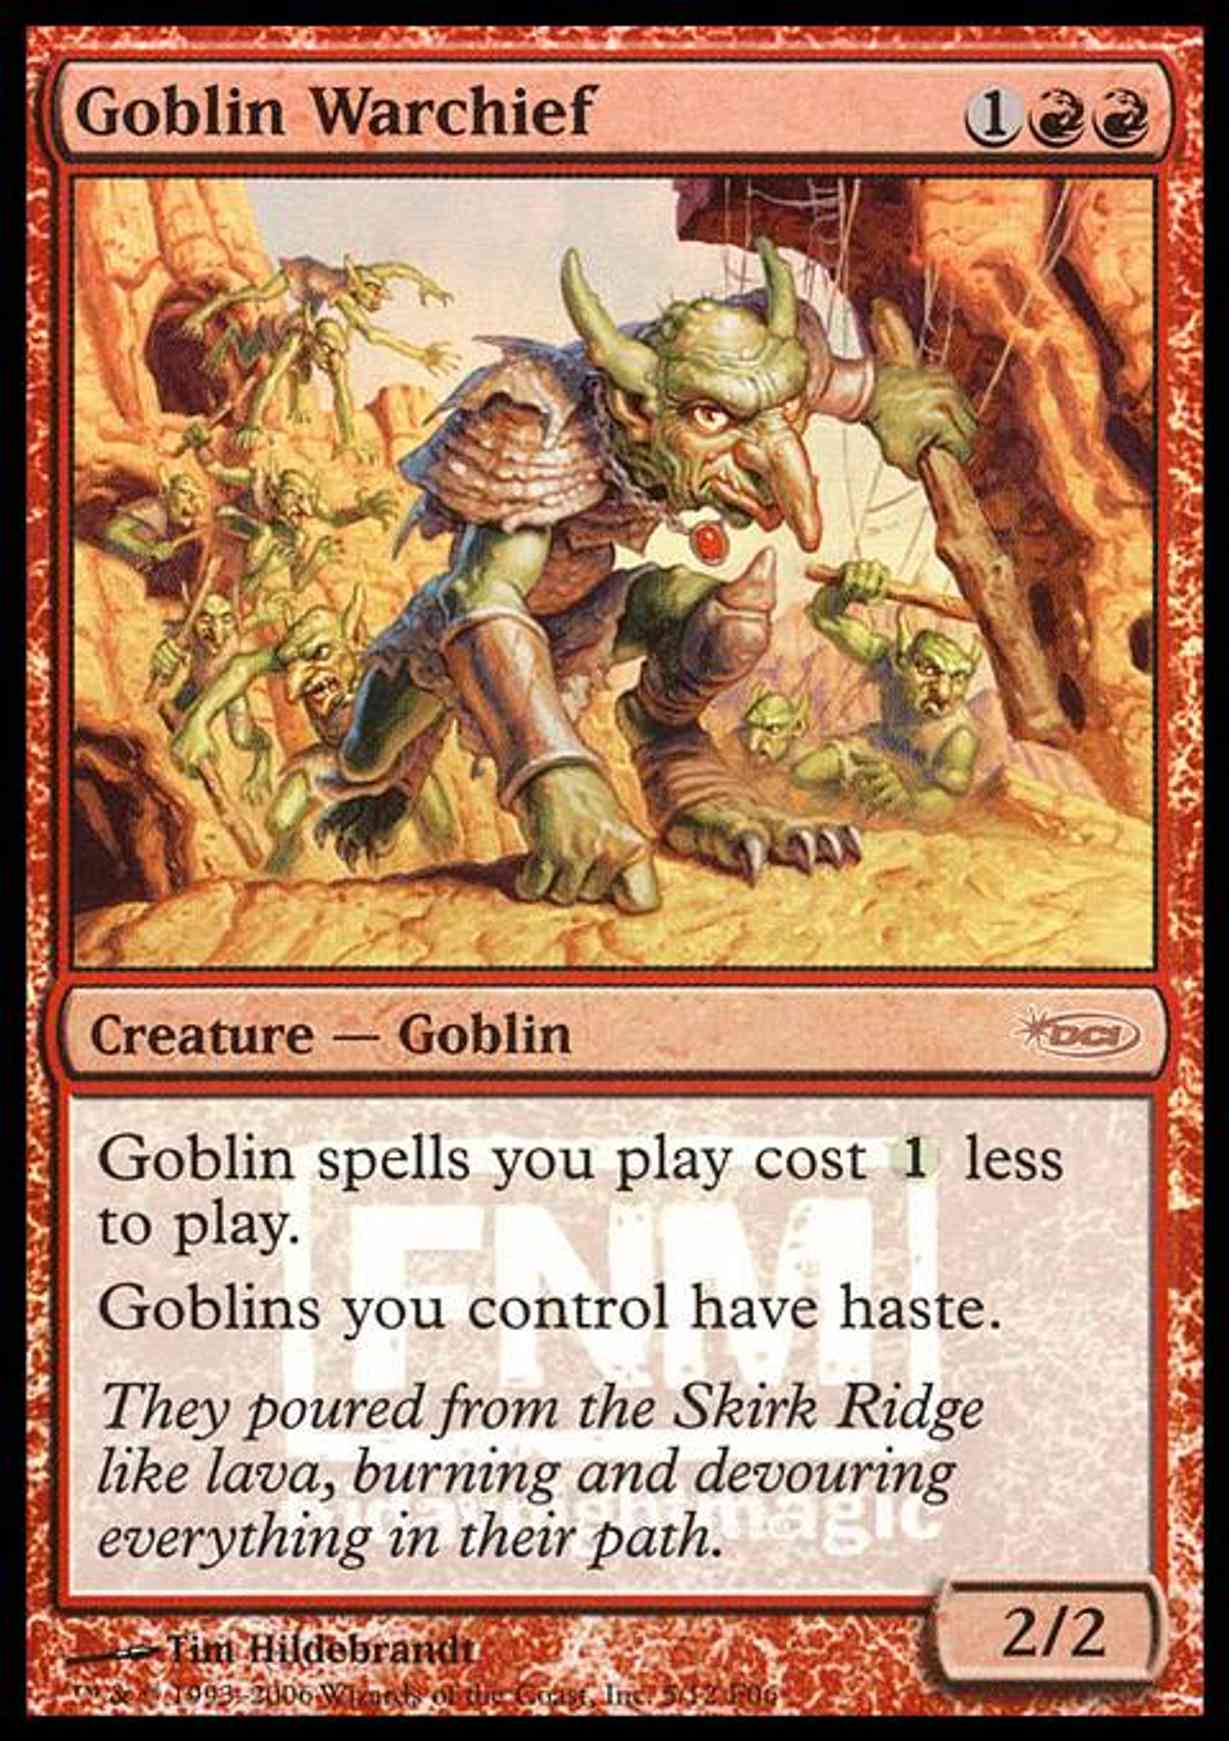 Goblin Warchief (2006) magic card front